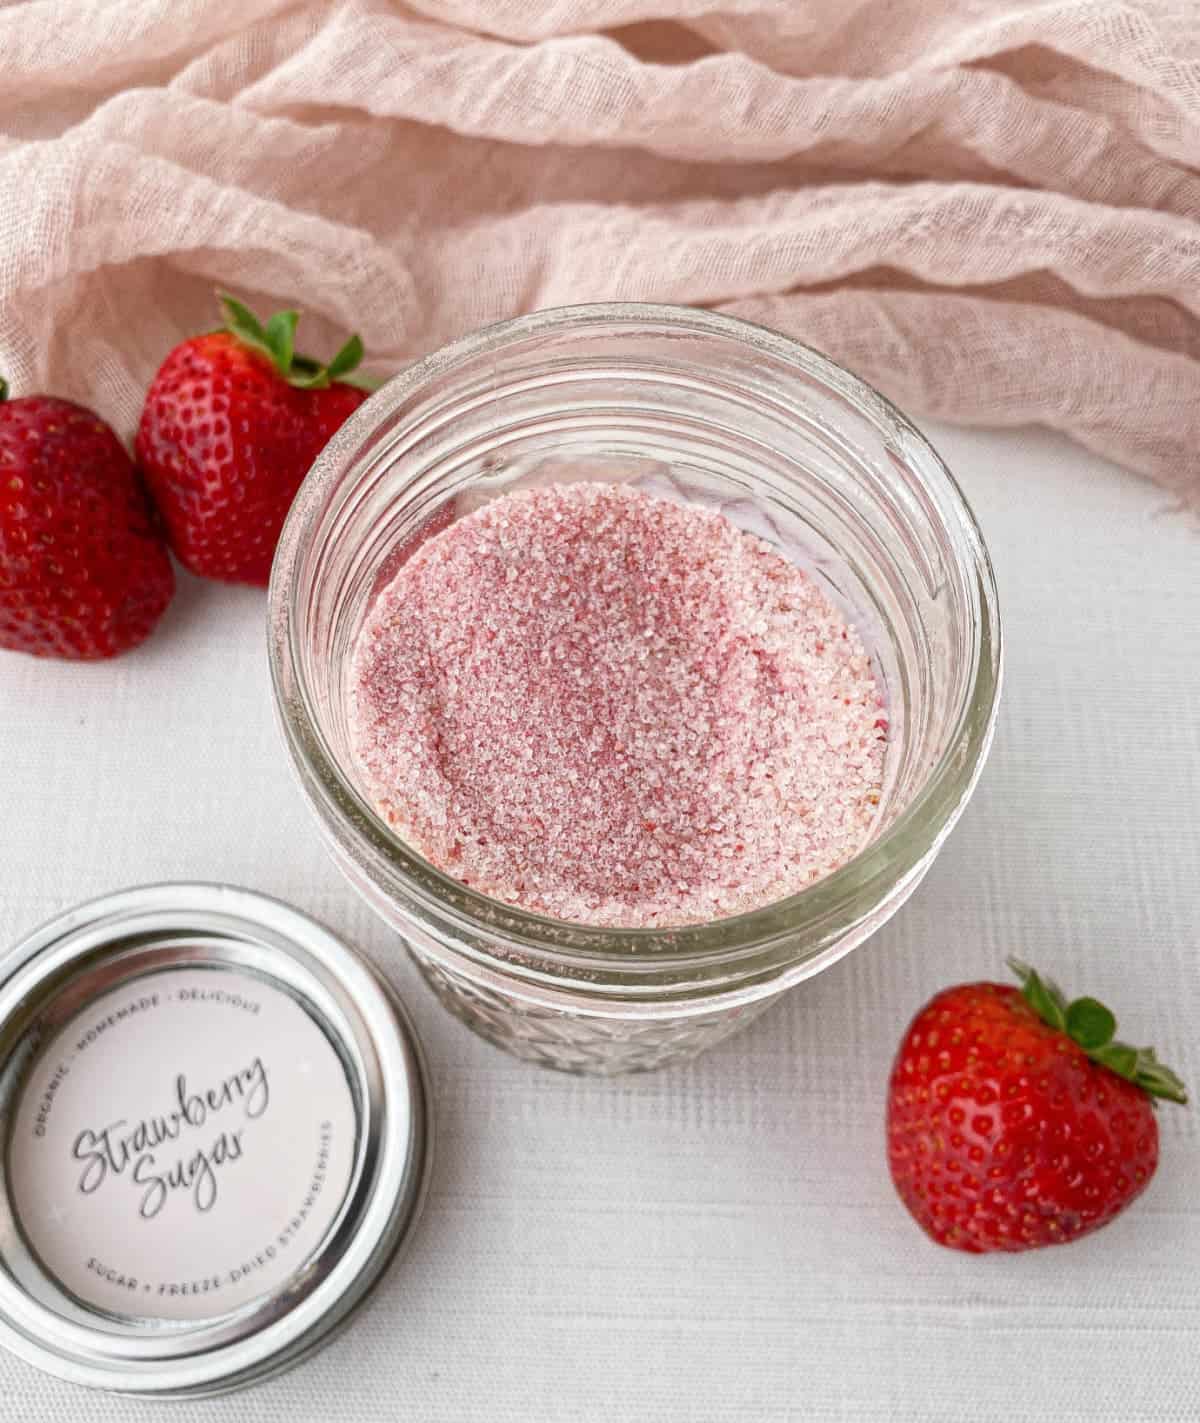 Open glass jar of Strawberry Sugar with fresh strawberries nearby.